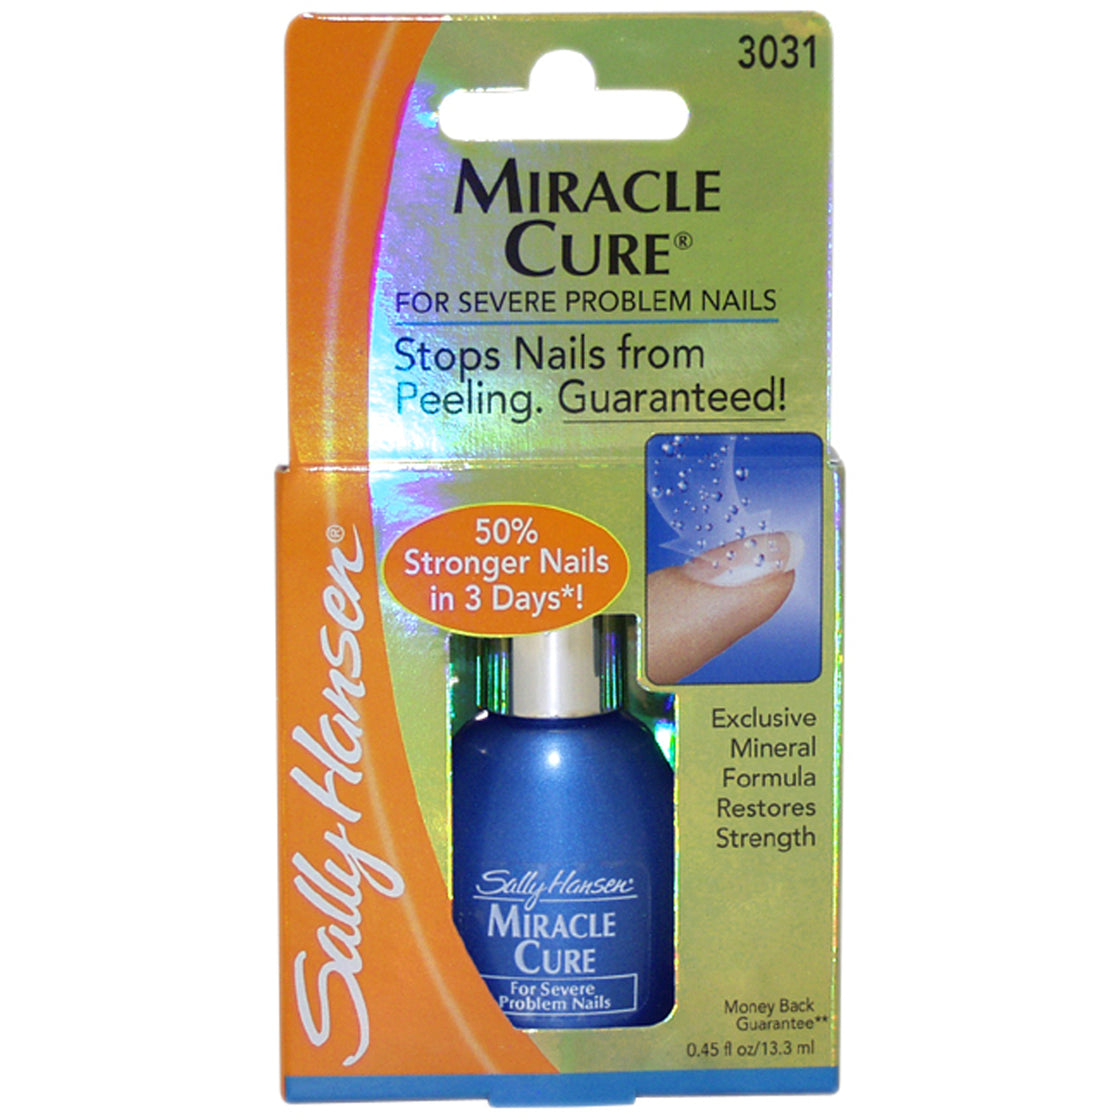 Miracle Cure For Severe Problem Nails - 45087 by Sally Hansen for Unisex - 0.45 oz Nail Polish